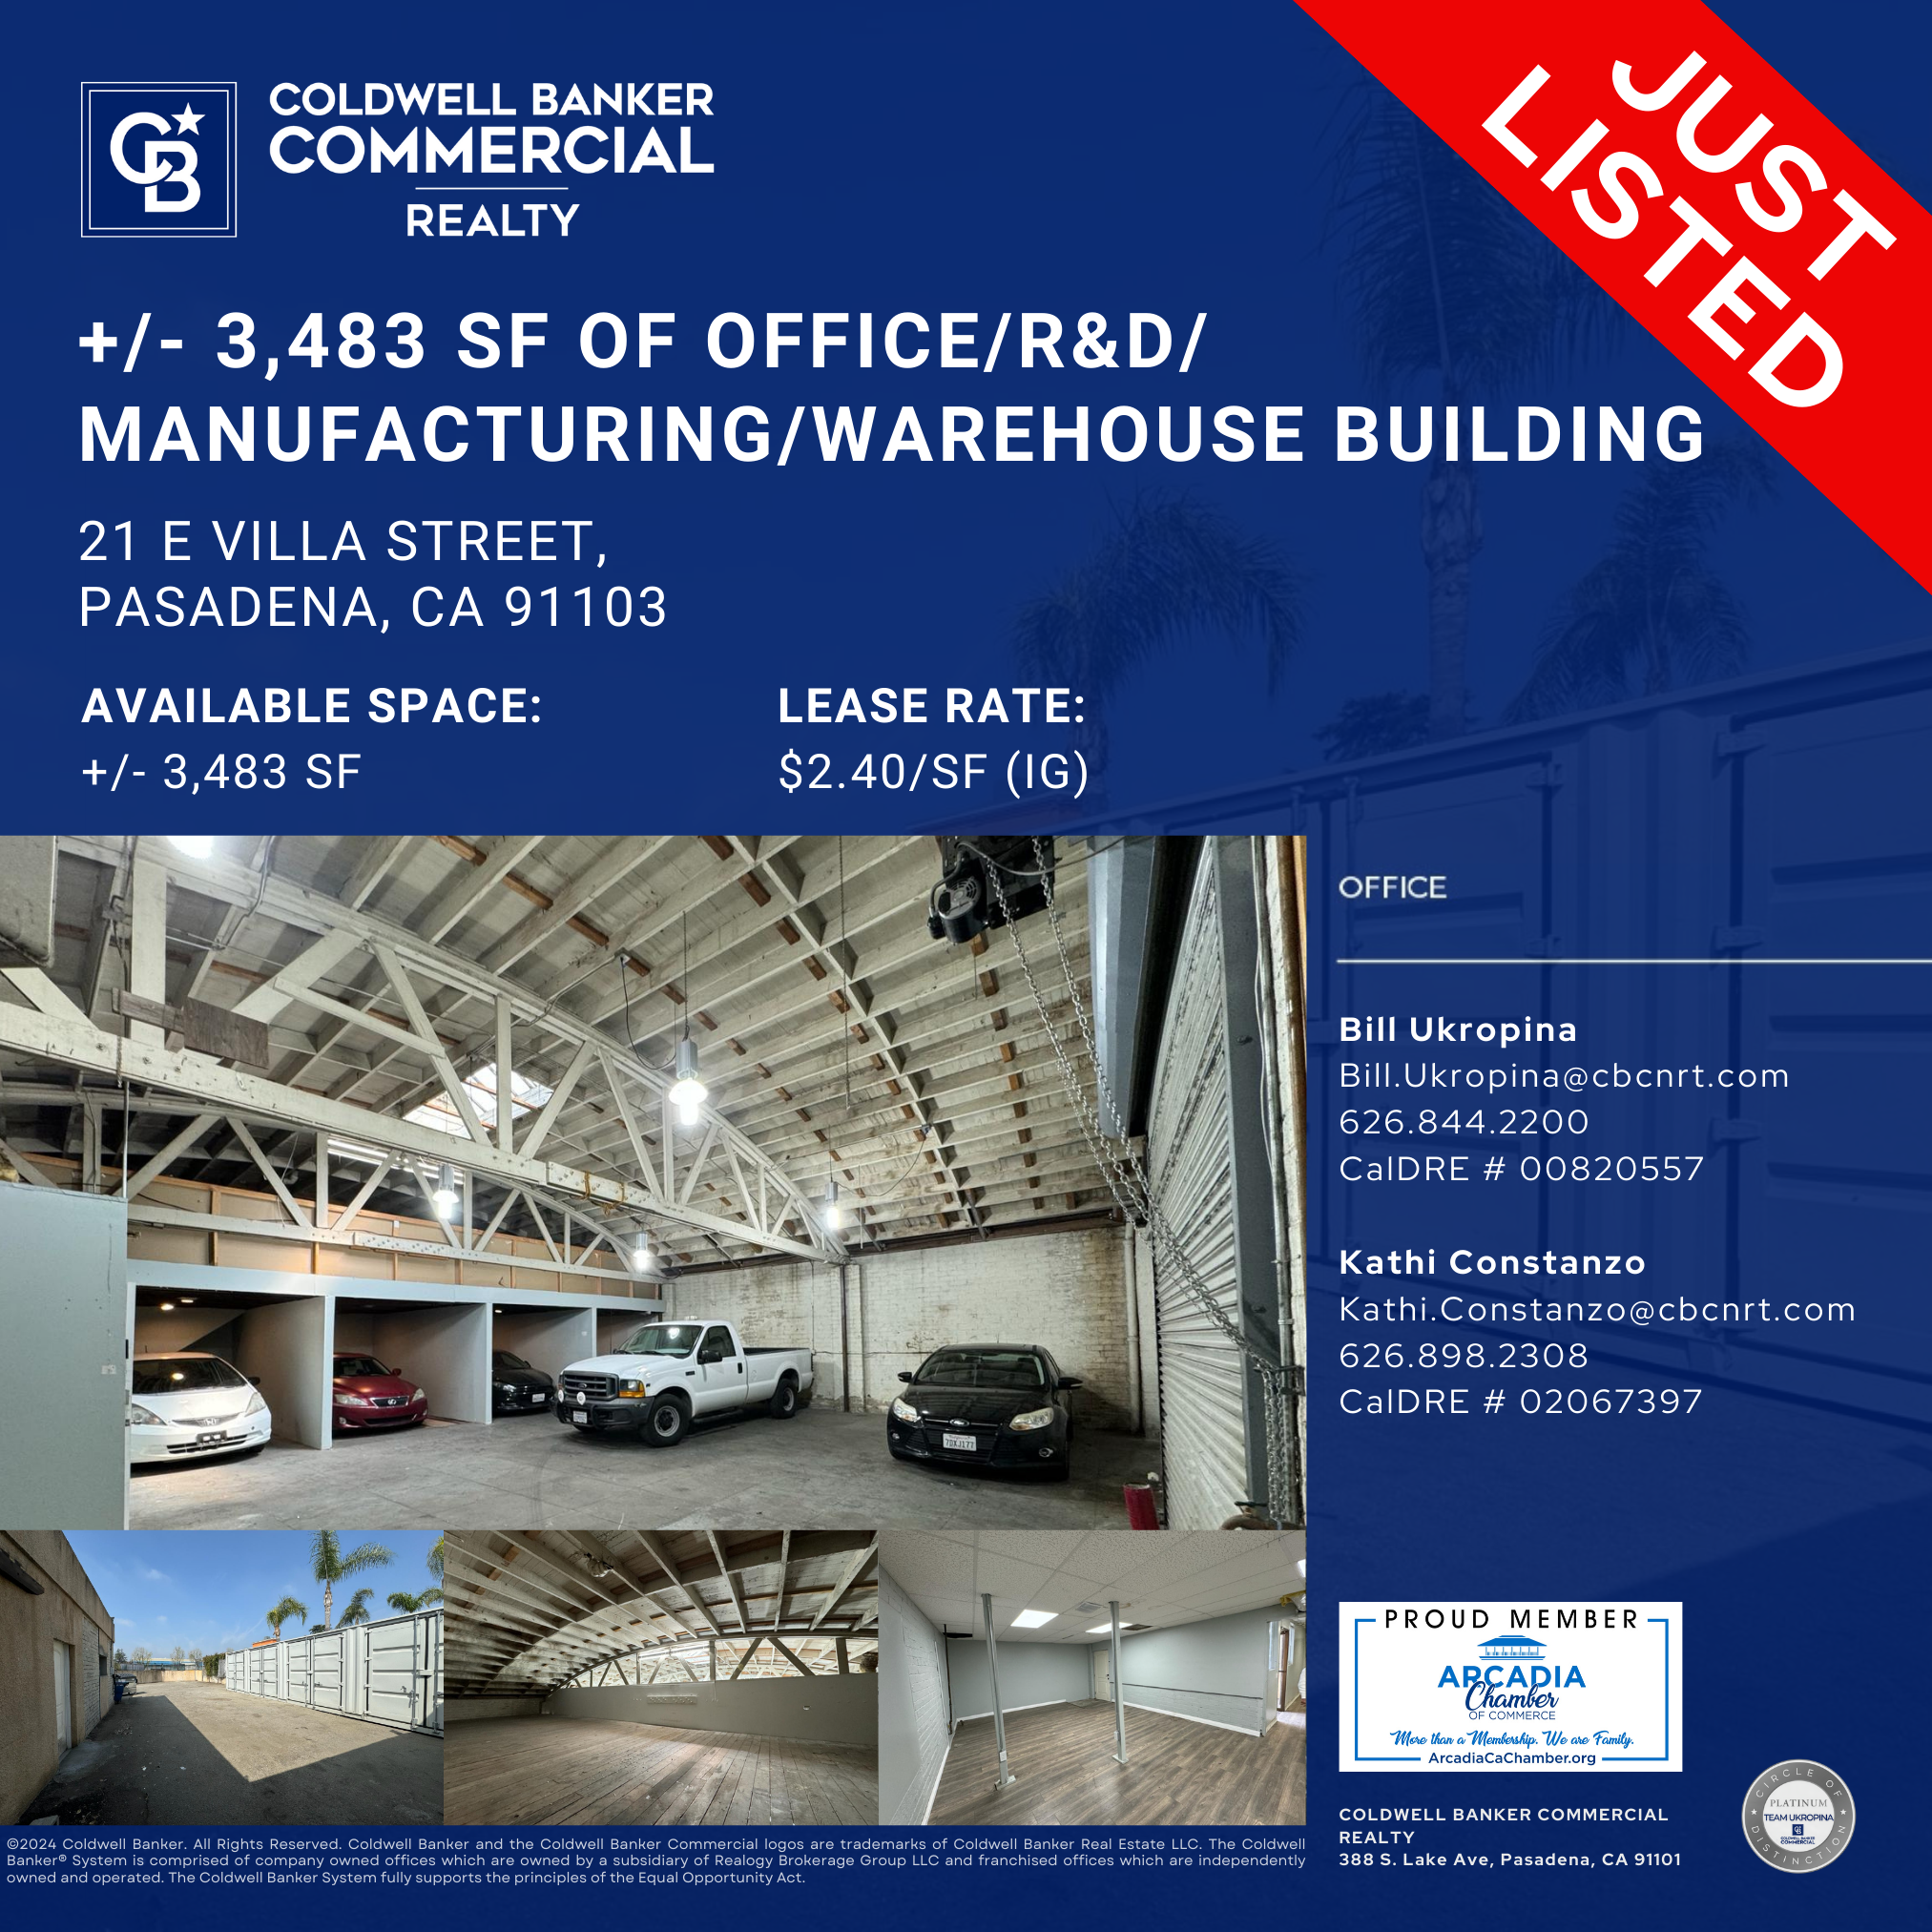 21 E Villa St in Pasadena for lease from Coldwell Banker Commercial